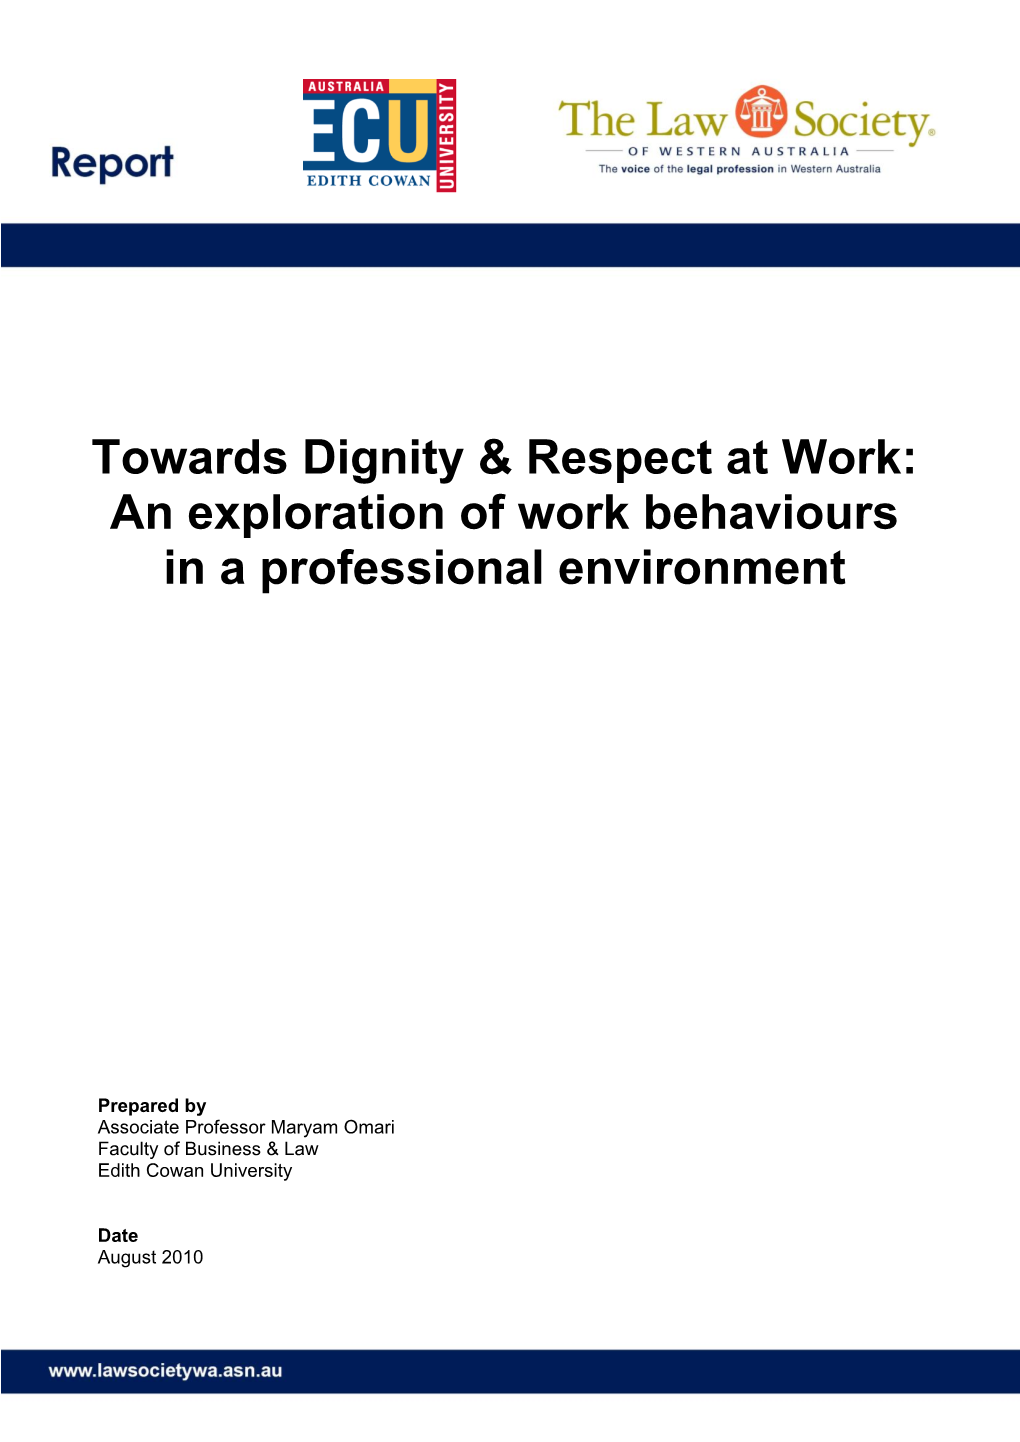 Towards Dignity & Respect at Work: an Exploration of Work Behaviours